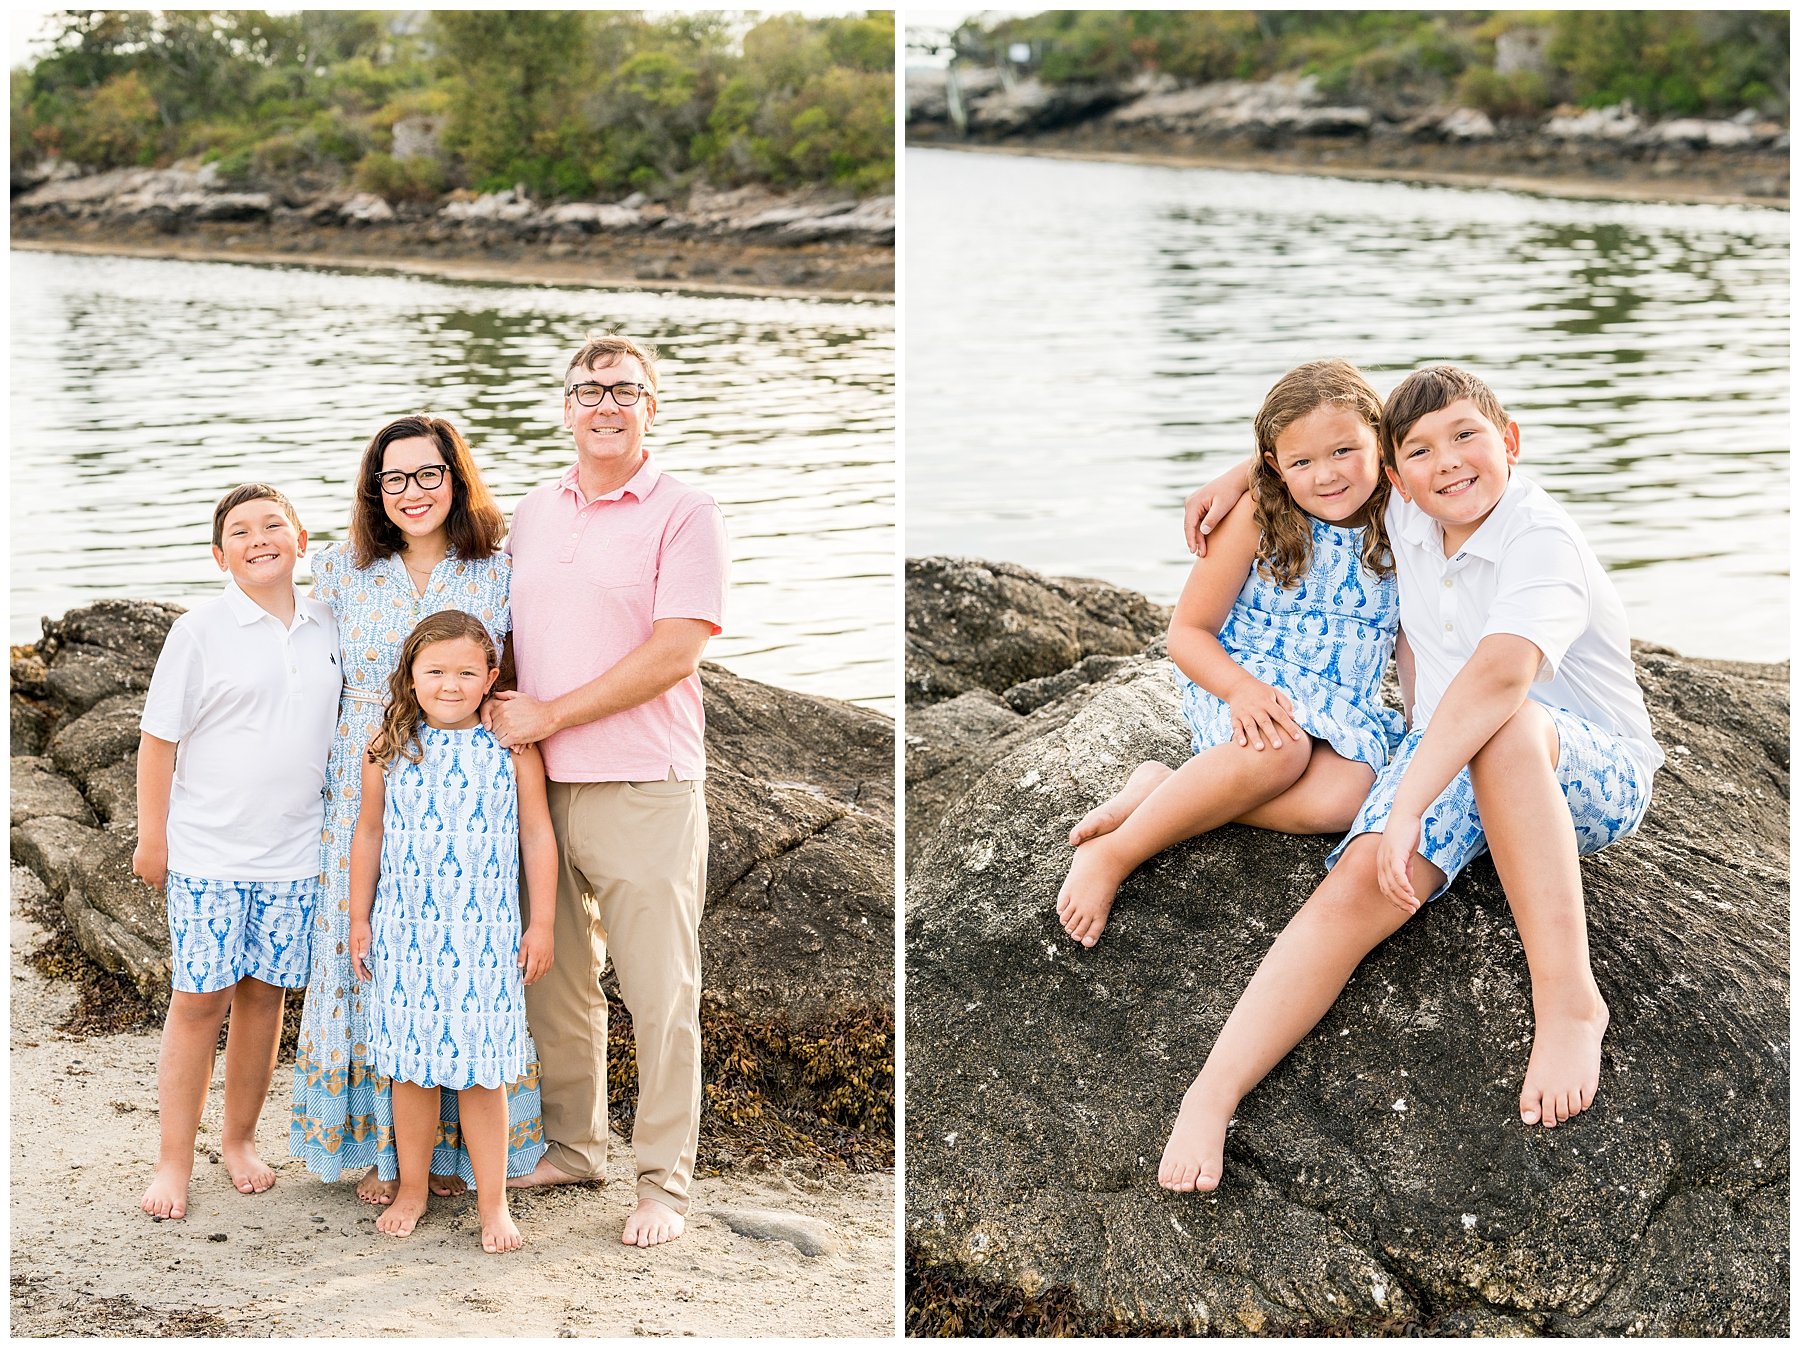 Boothbay Harbor Family Photographer, Southport Island Maine Family Photographer, Two Adventurous Souls- 082322_0008.jpg